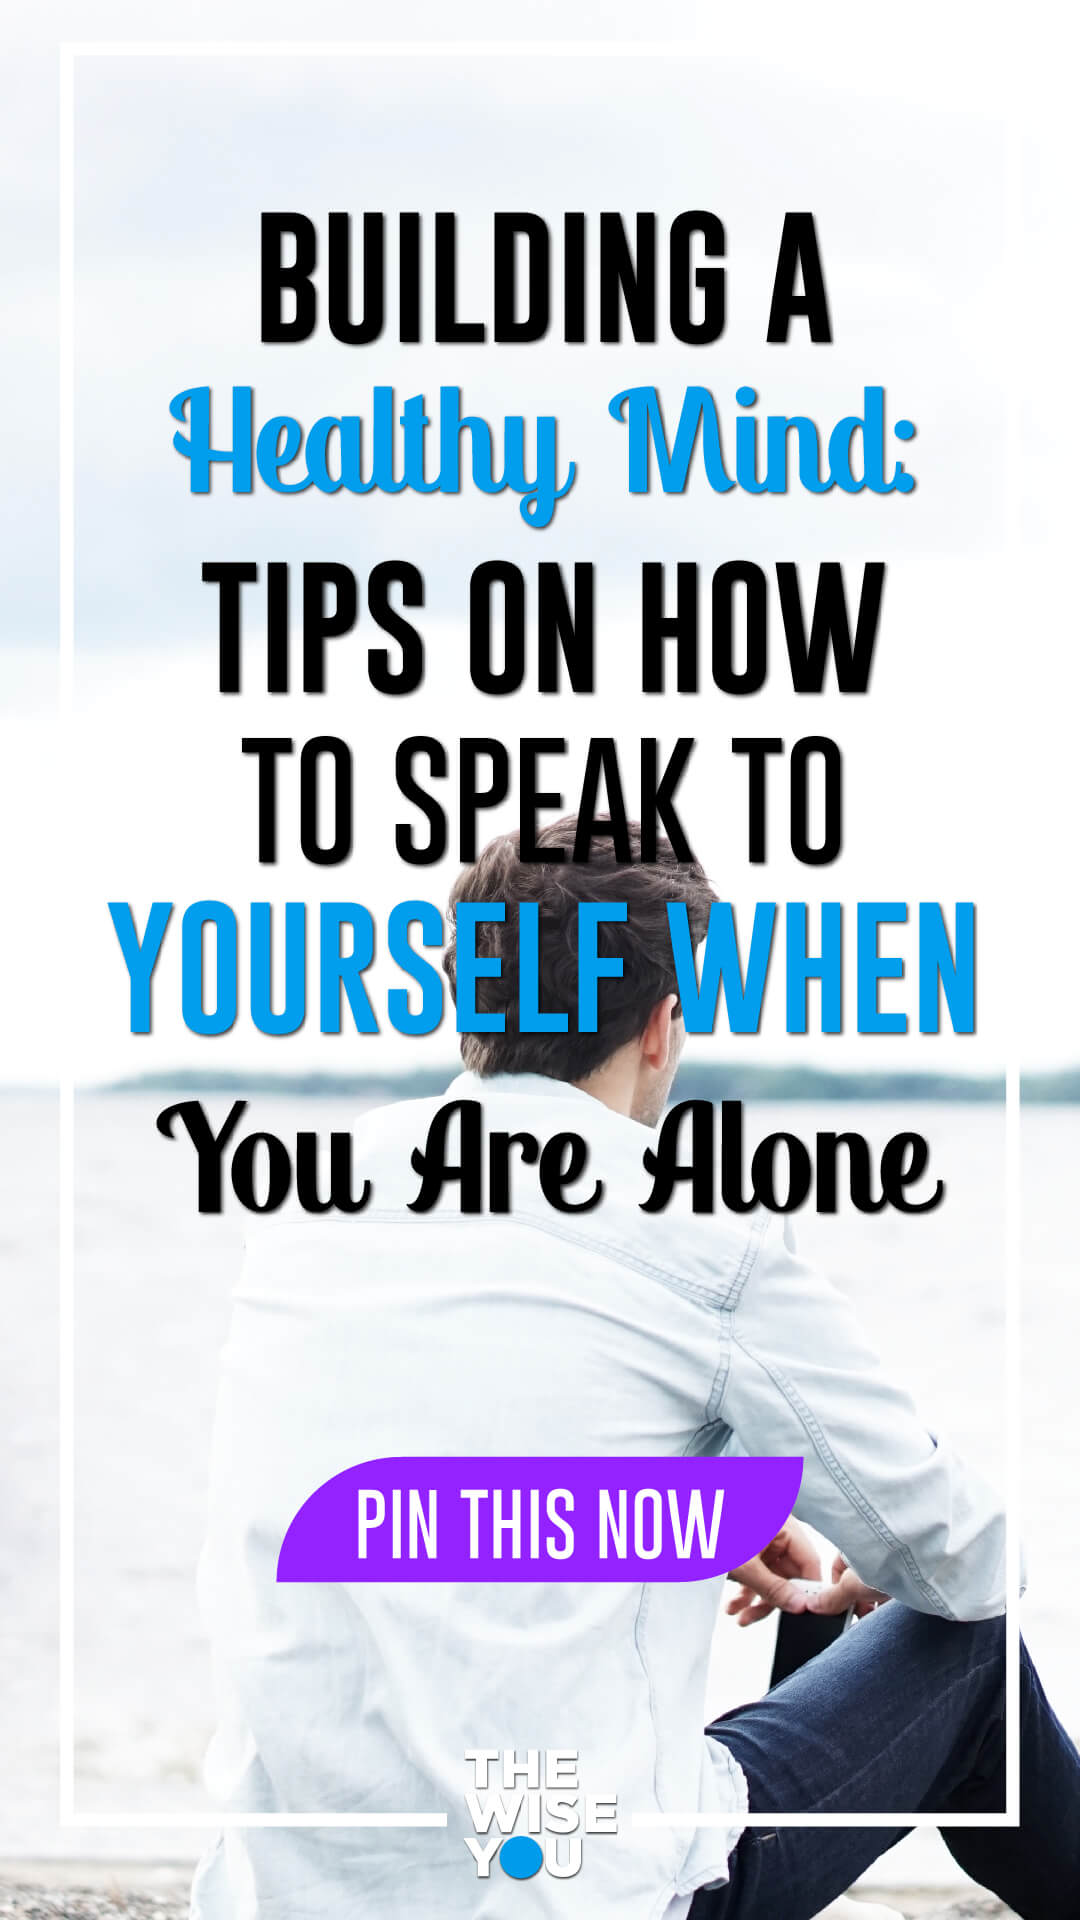 Building A Healthy Mind: Tips On How To Speak To Yourself When You Are Alone